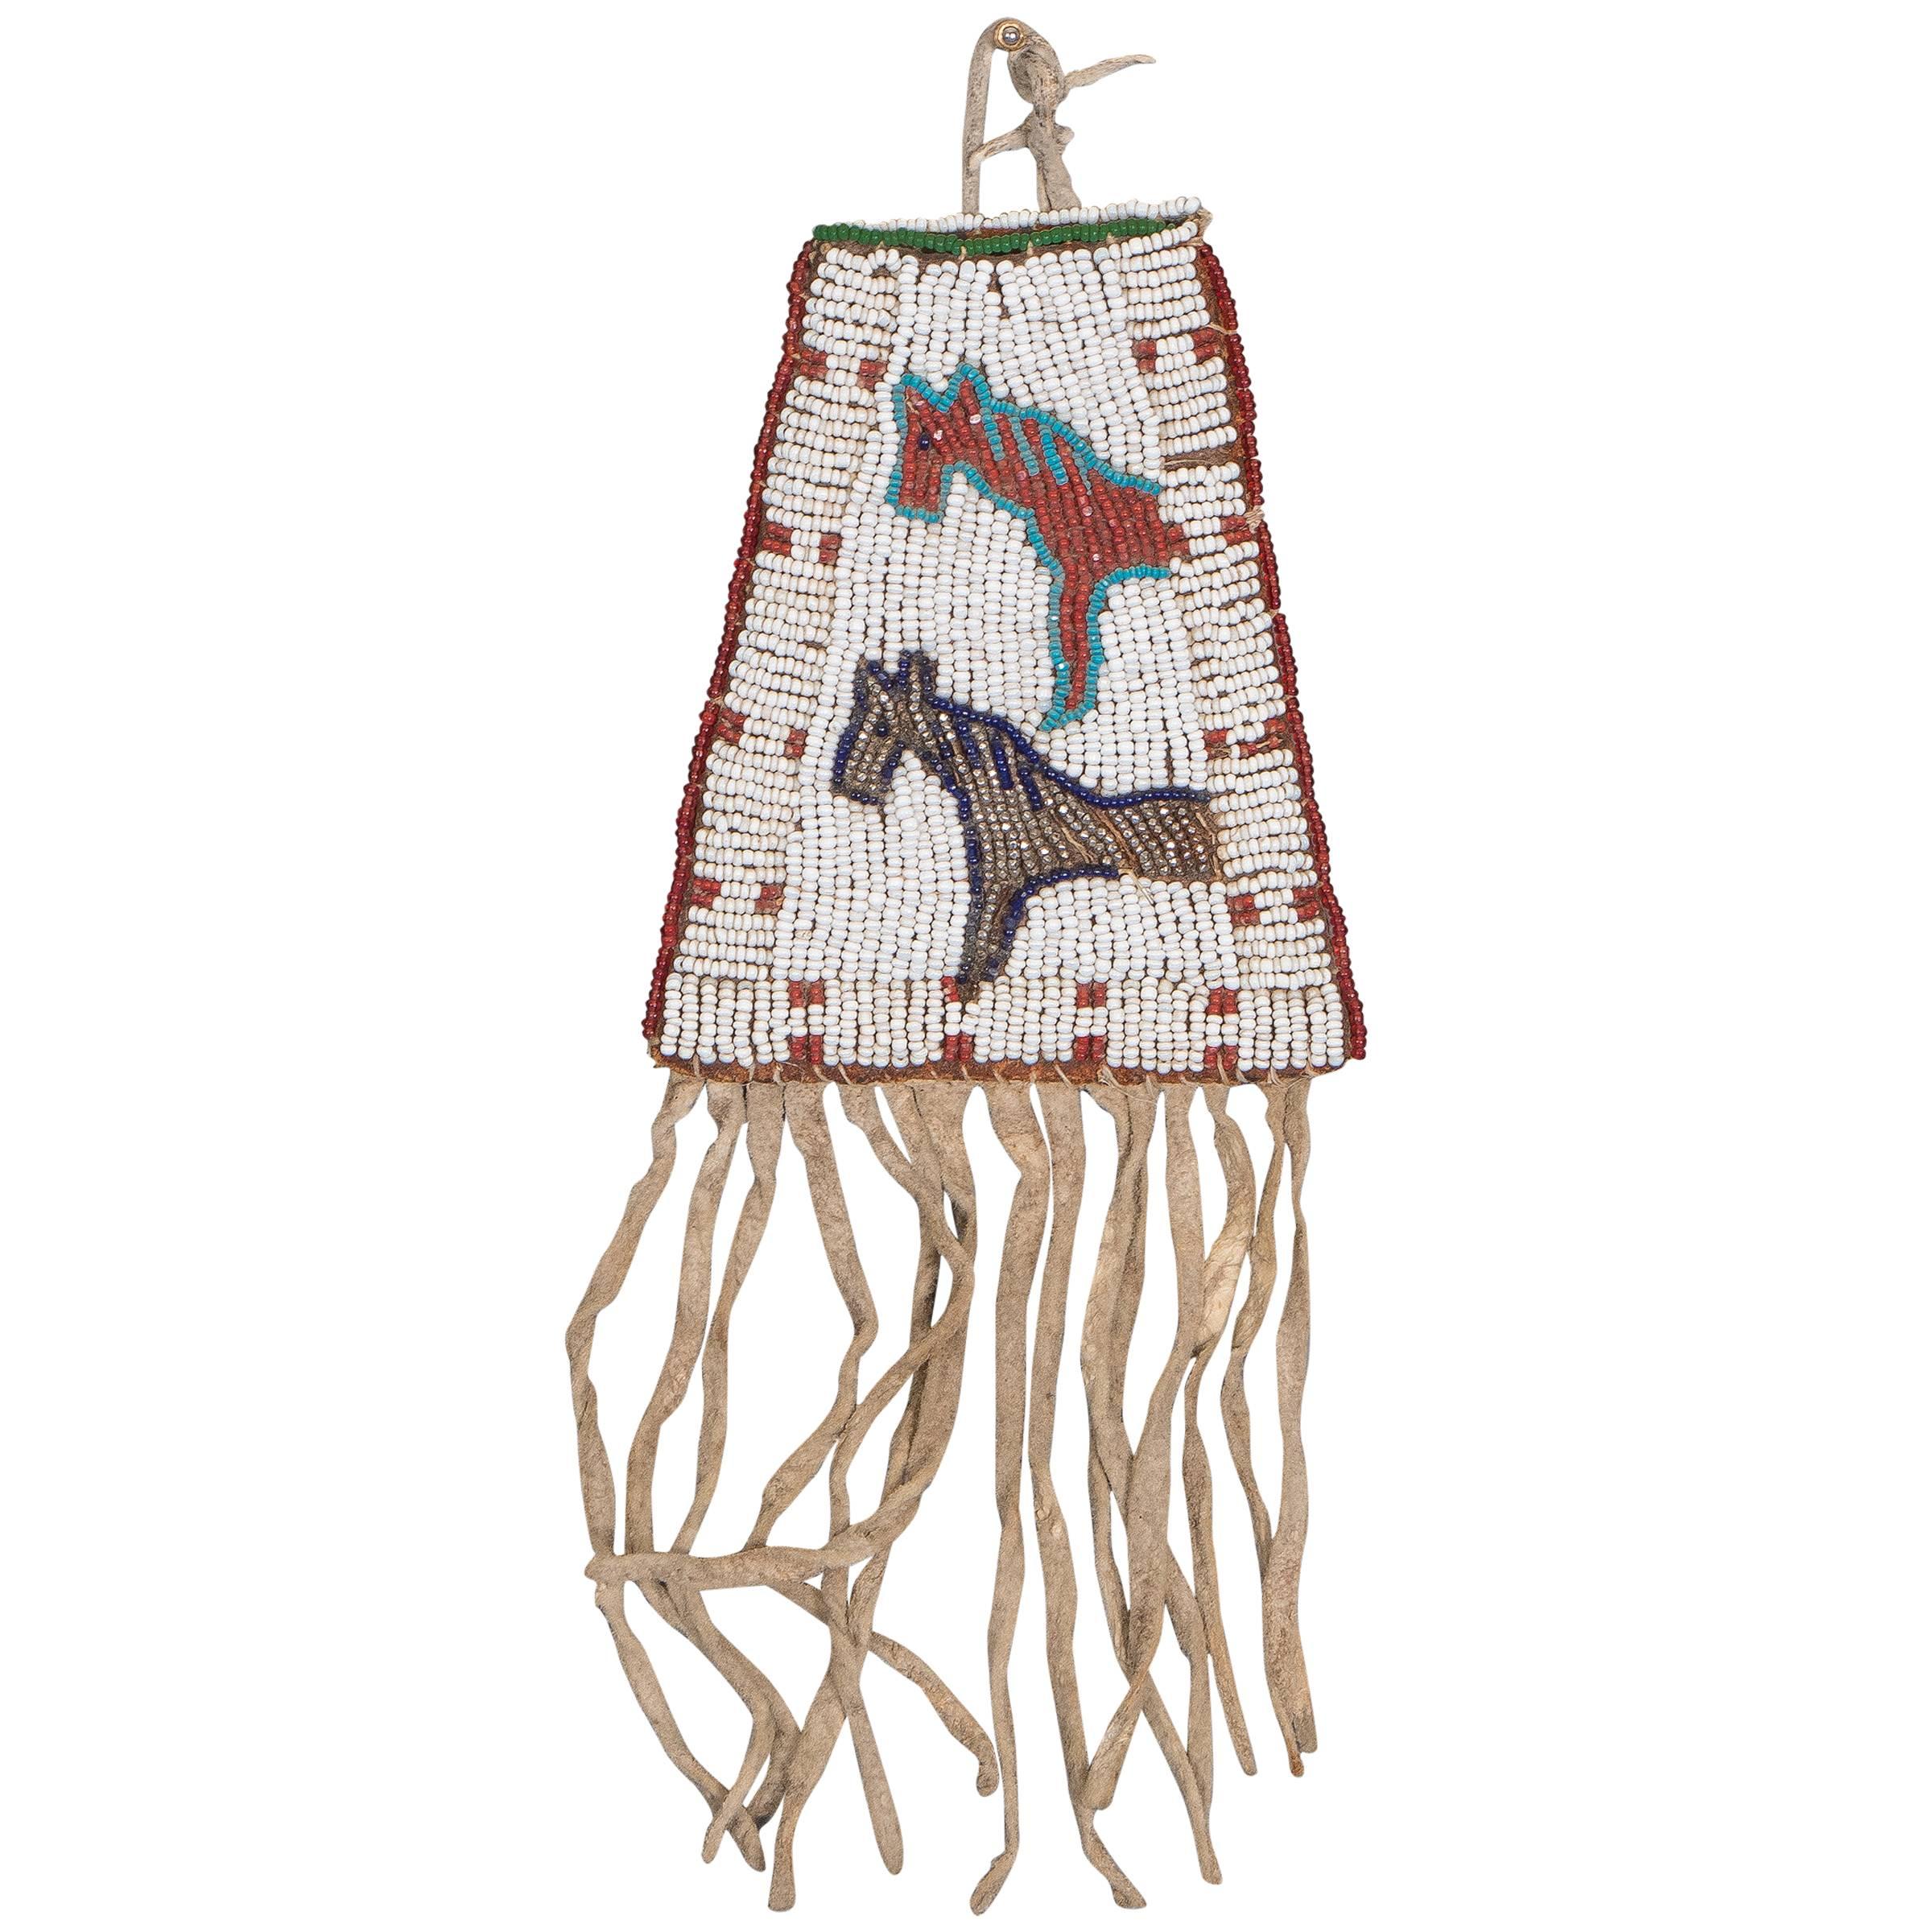 Antique Native American Beaded Bag Sioux, 19th Century